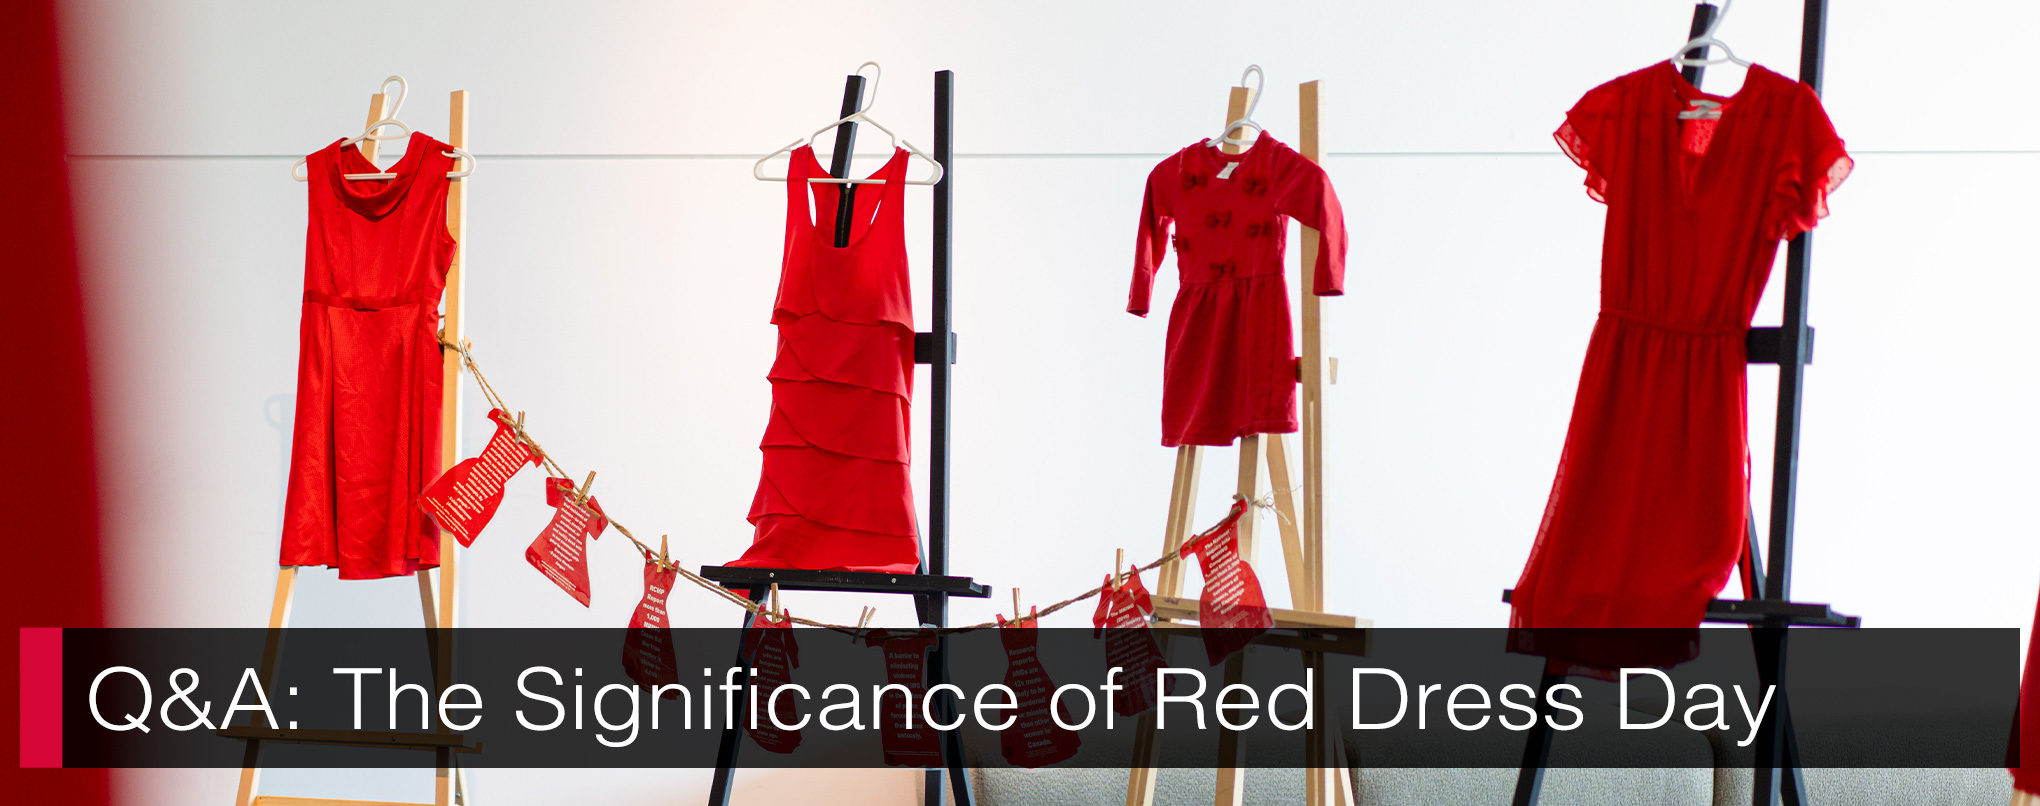 Four red dresses hung on clothes hangers displayed on easels with text, "Q&A The Significance of Red Dress Day"